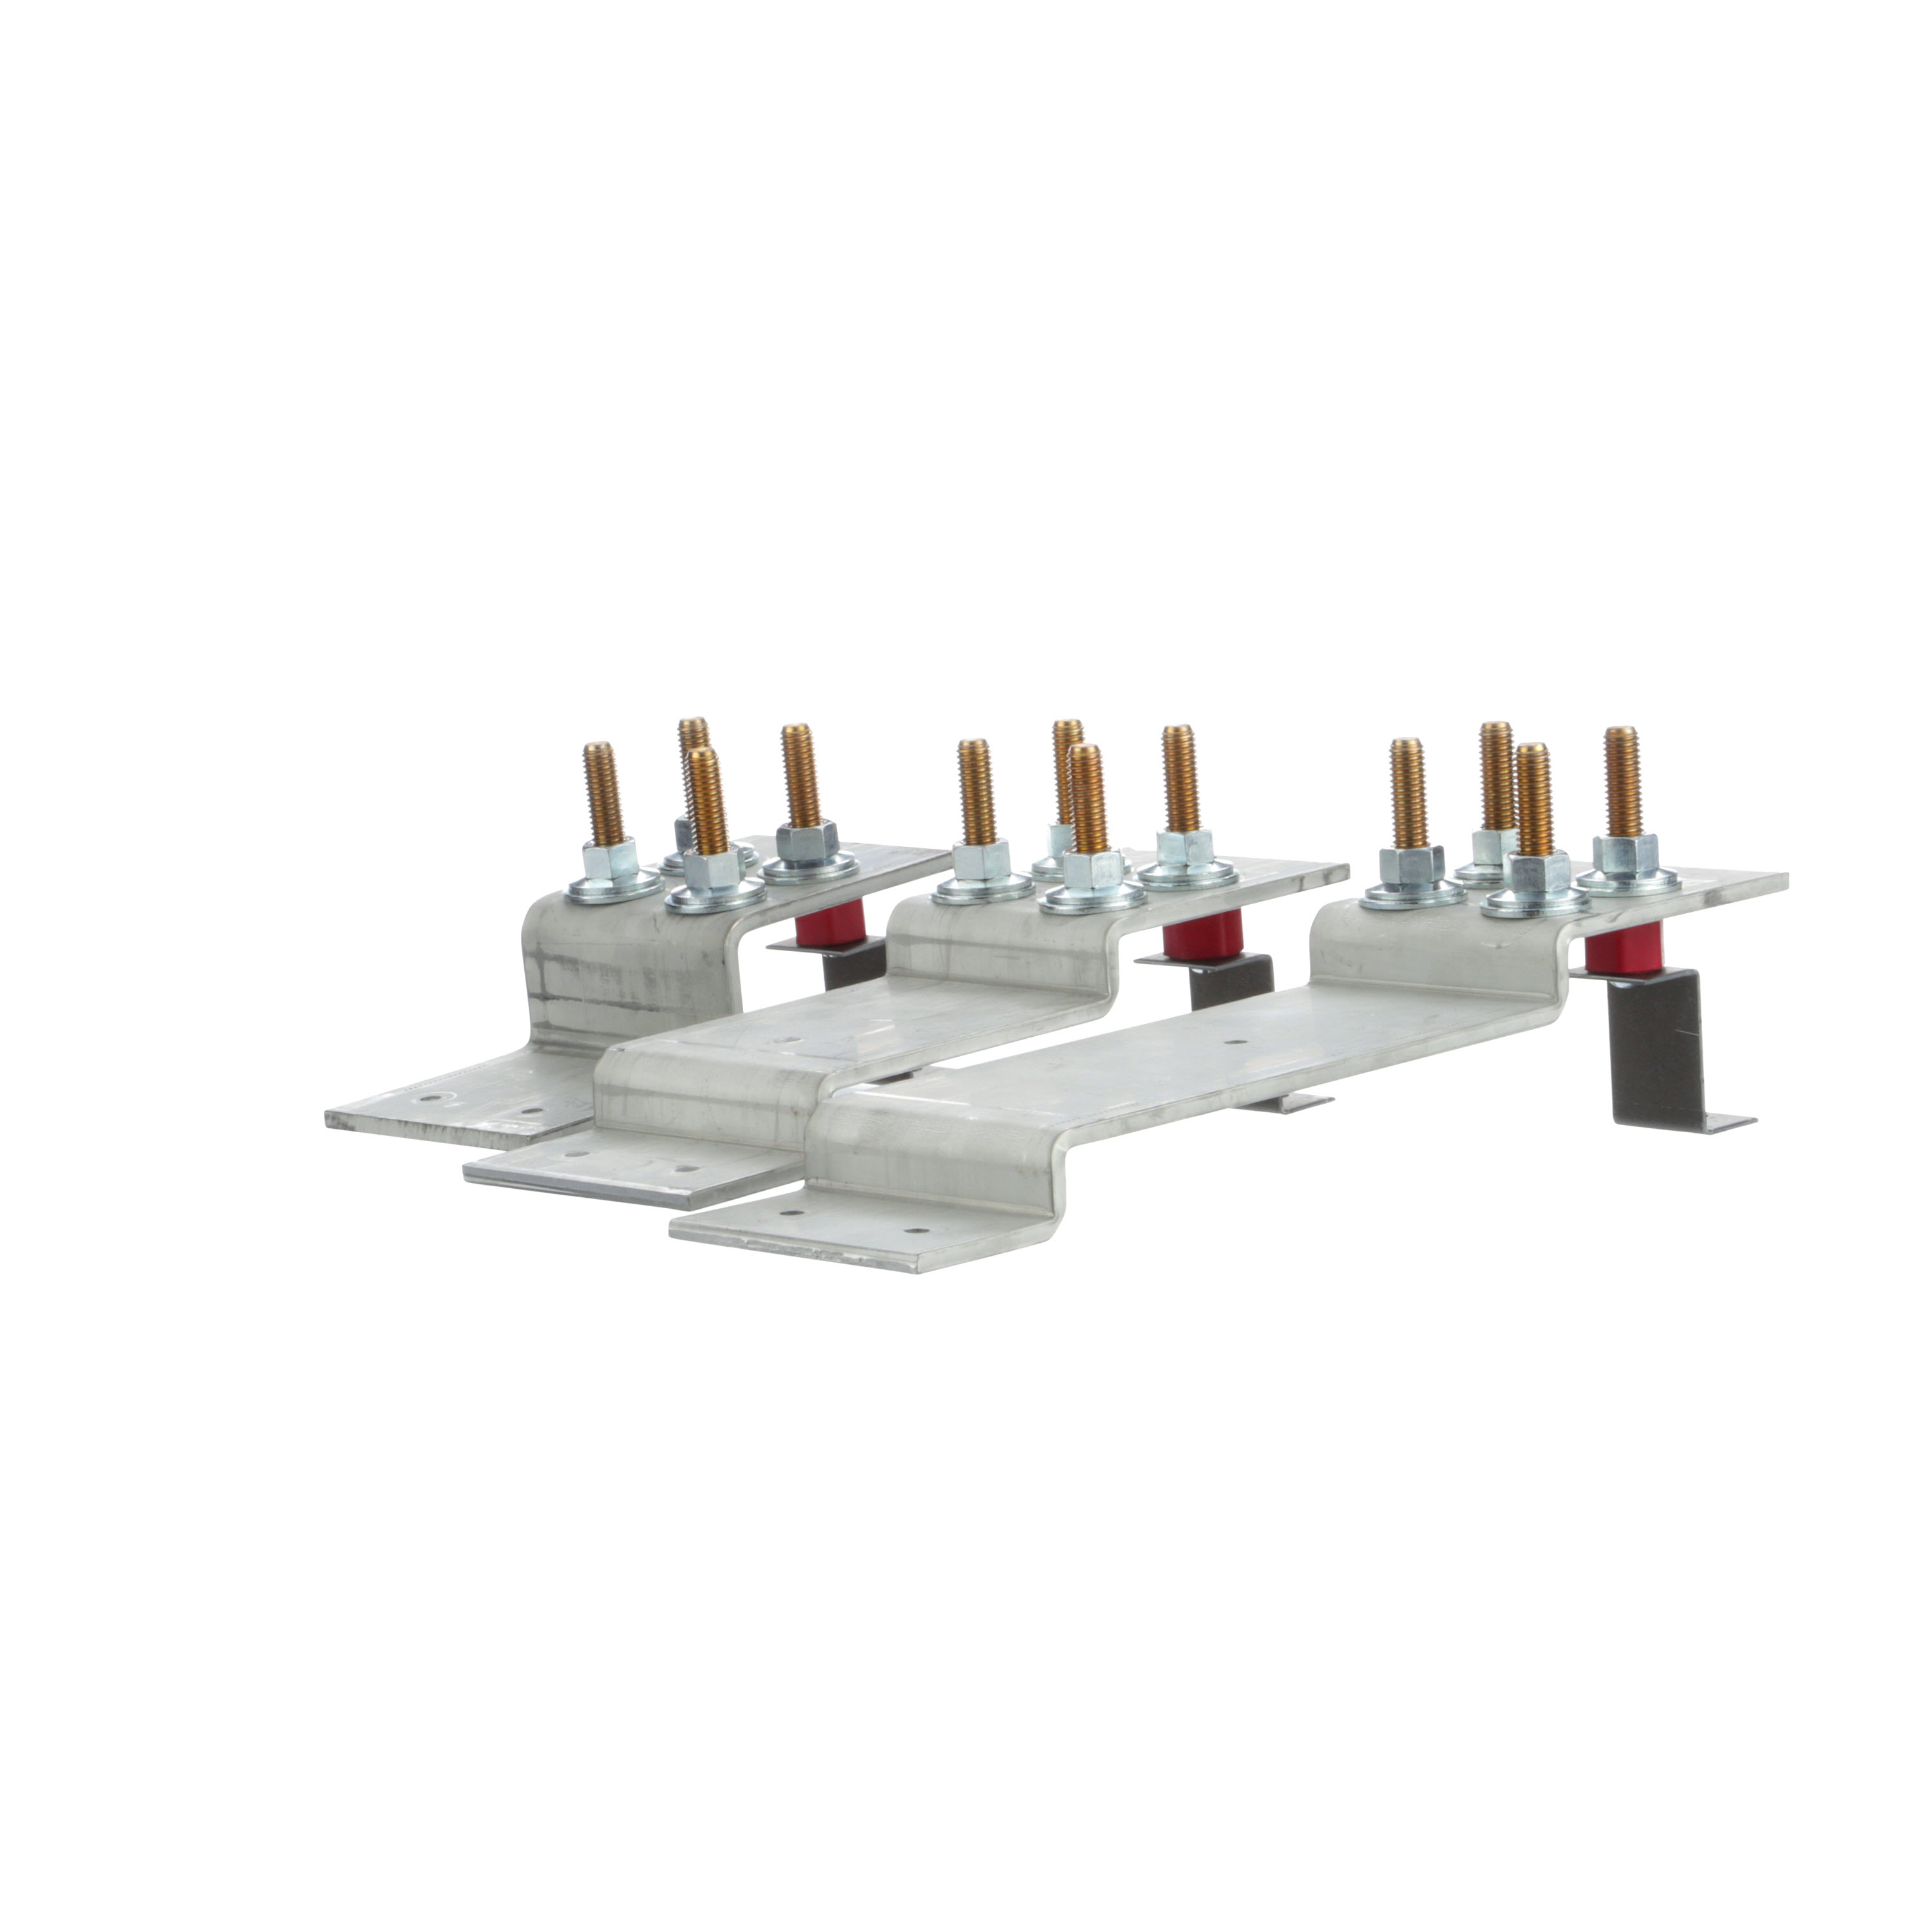 Siemens Low Voltage s Multi-Family Metering Line of Power Mod Accessories and Replacement Parts as part of the Power Mod Accessories and Replacement Parts Group. Type UNI-PAK Features STUD KIT Appn GARDEN - STYLE Std UL-50,67,414 A. Rating600A Size 6.000x16 .000x25.000. Insulated. Mounting WALL MOUNTED